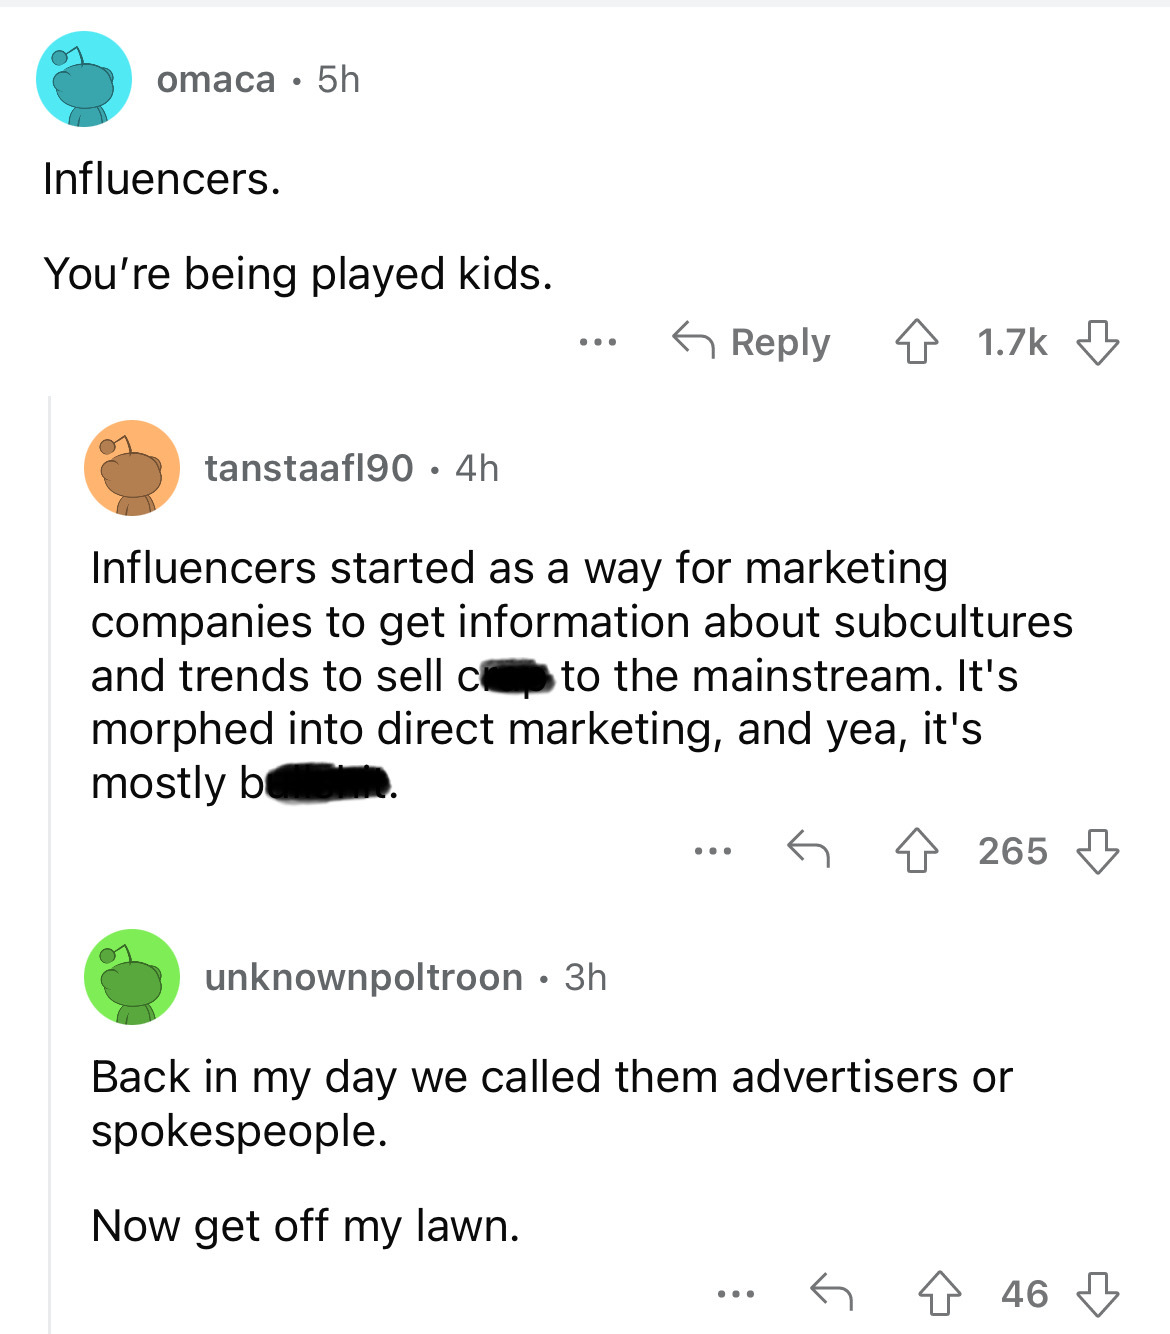 document - omaca 5h Influencers. You're being played kids. tanstaafl90. 4h ... 4 Influencers started as a way for marketing companies to get information about subcultures and trends to sell c to the mainstream. It's morphed into direct marketing, and yea,